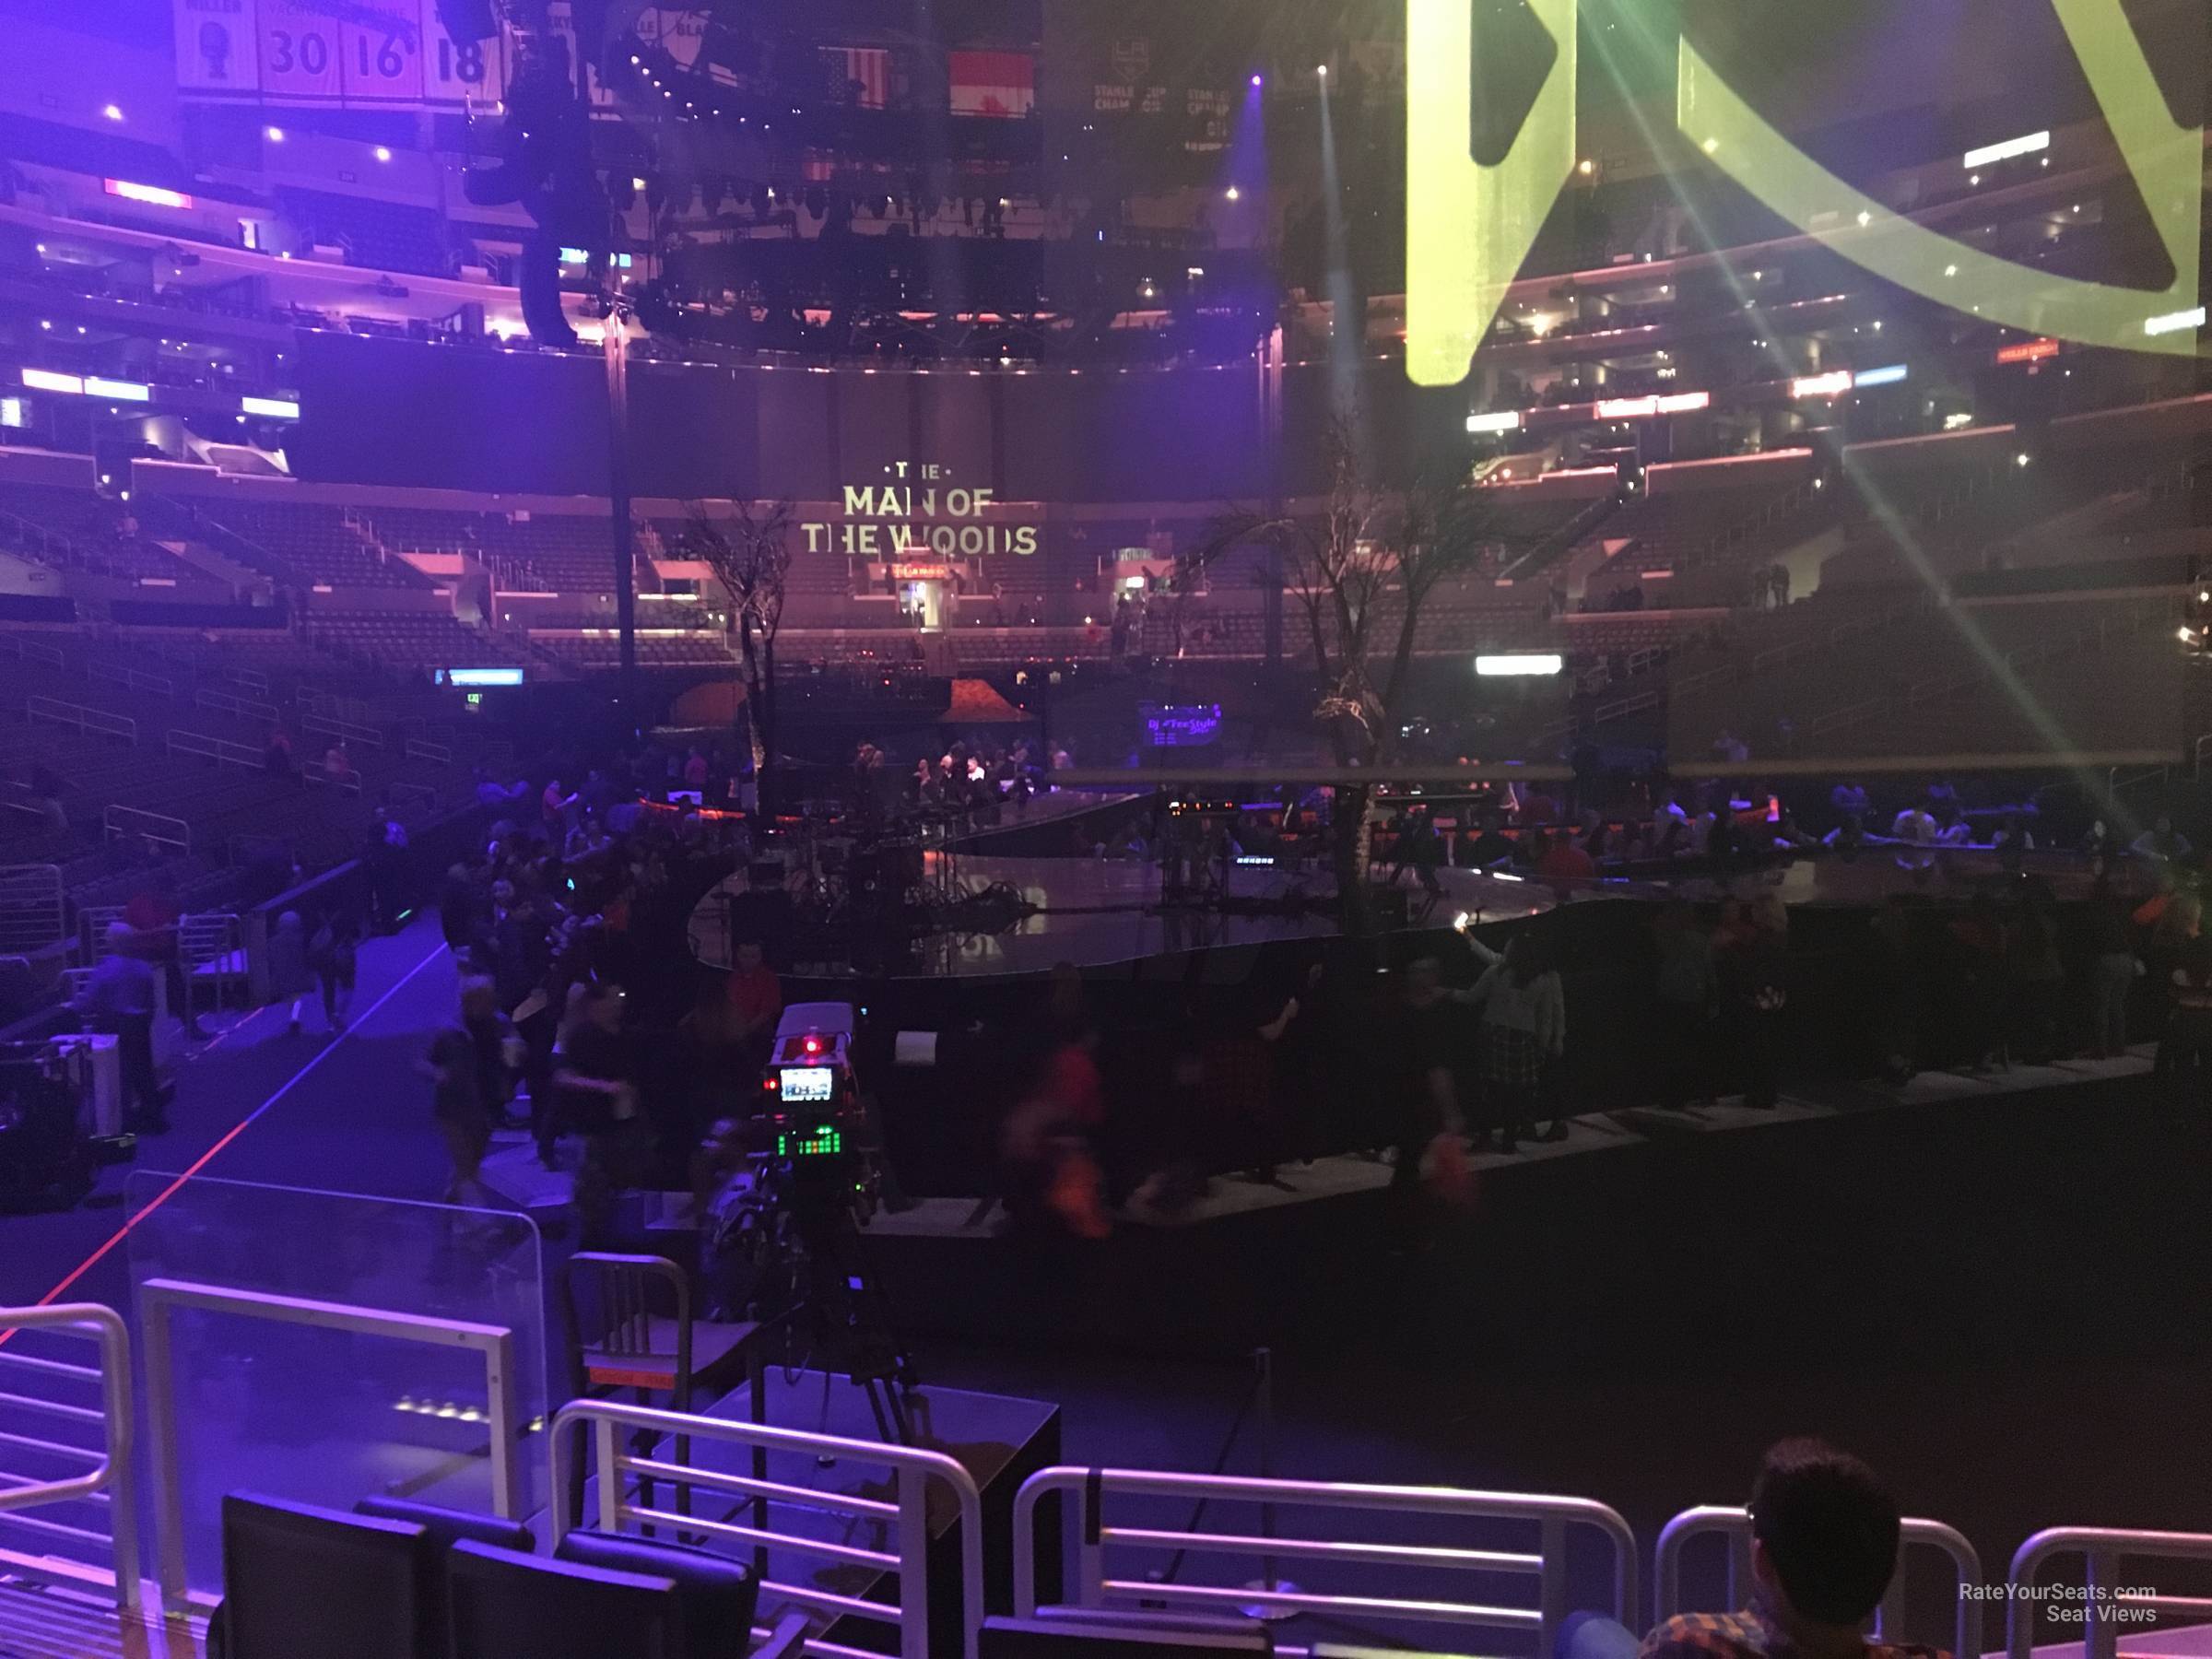 section 107, row 5 seat view  for concert - crypto.com arena